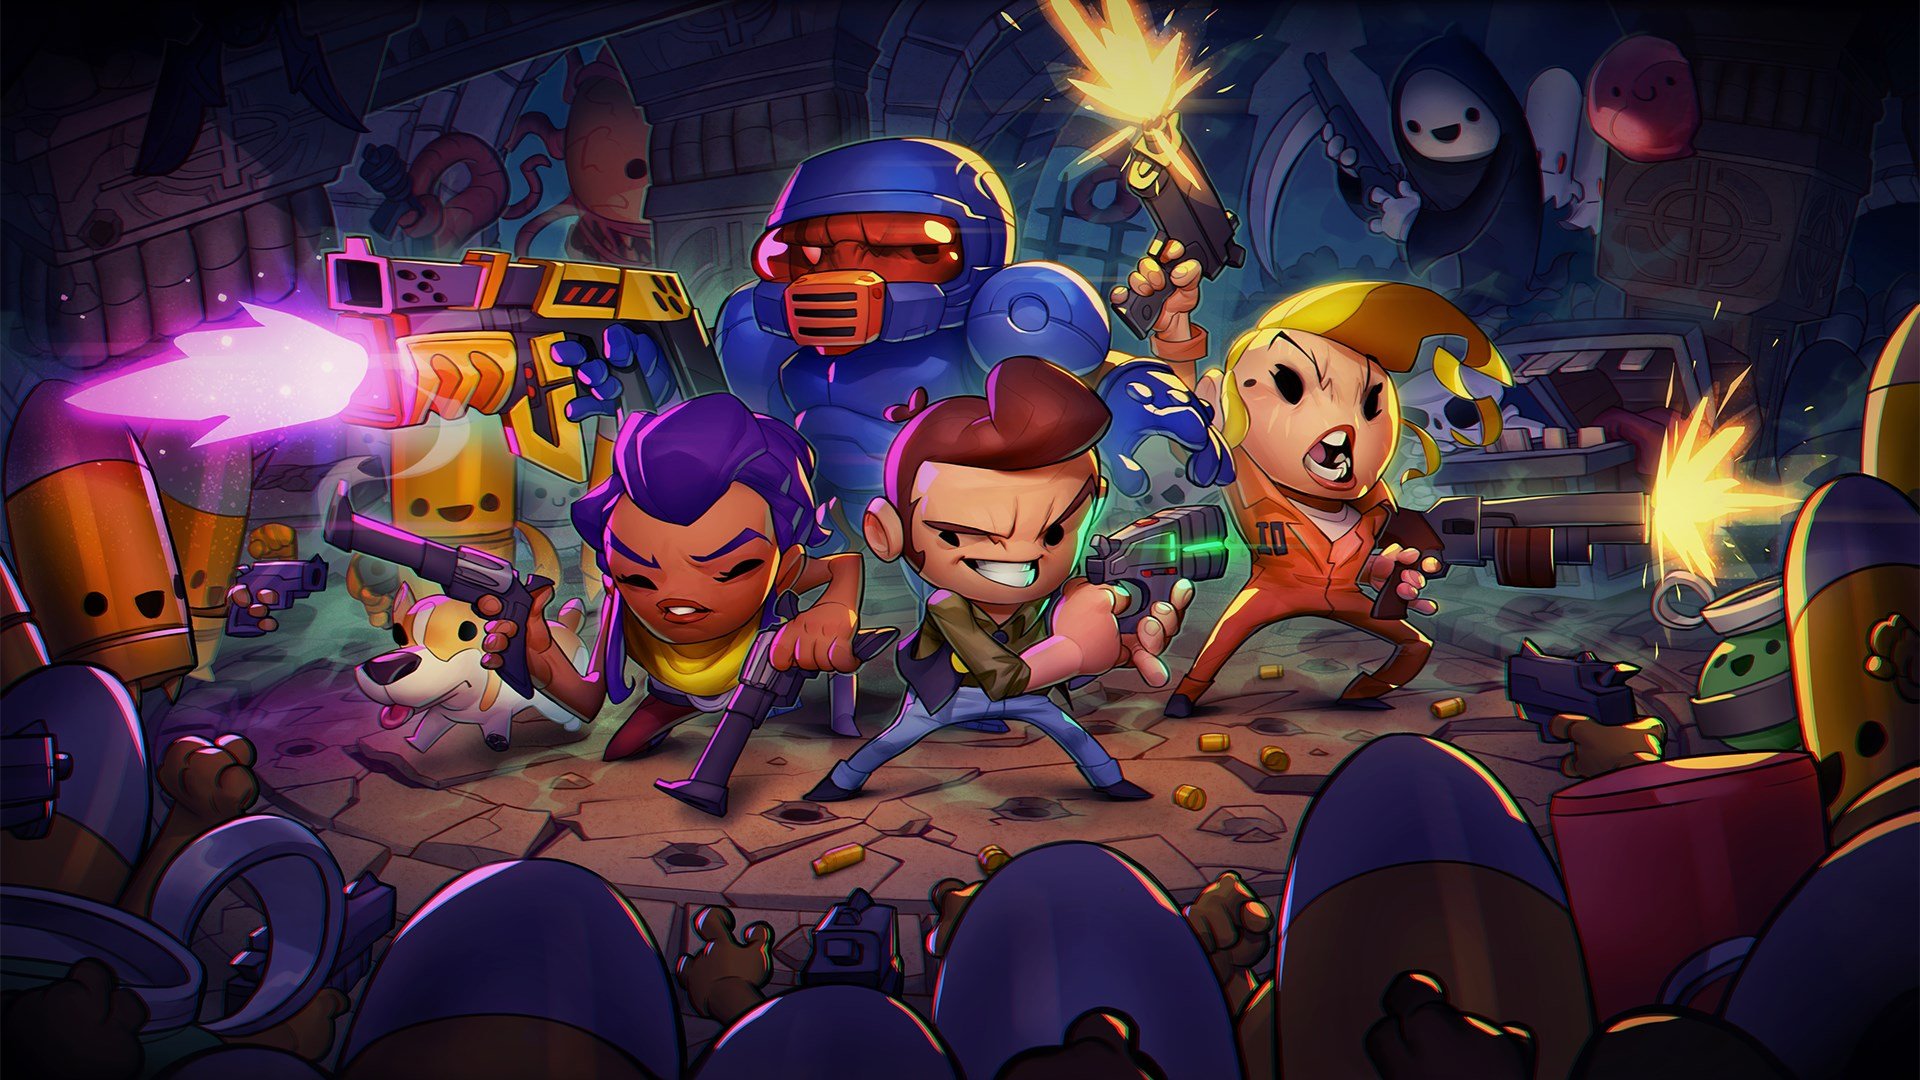 Enter the Gungeon cover image